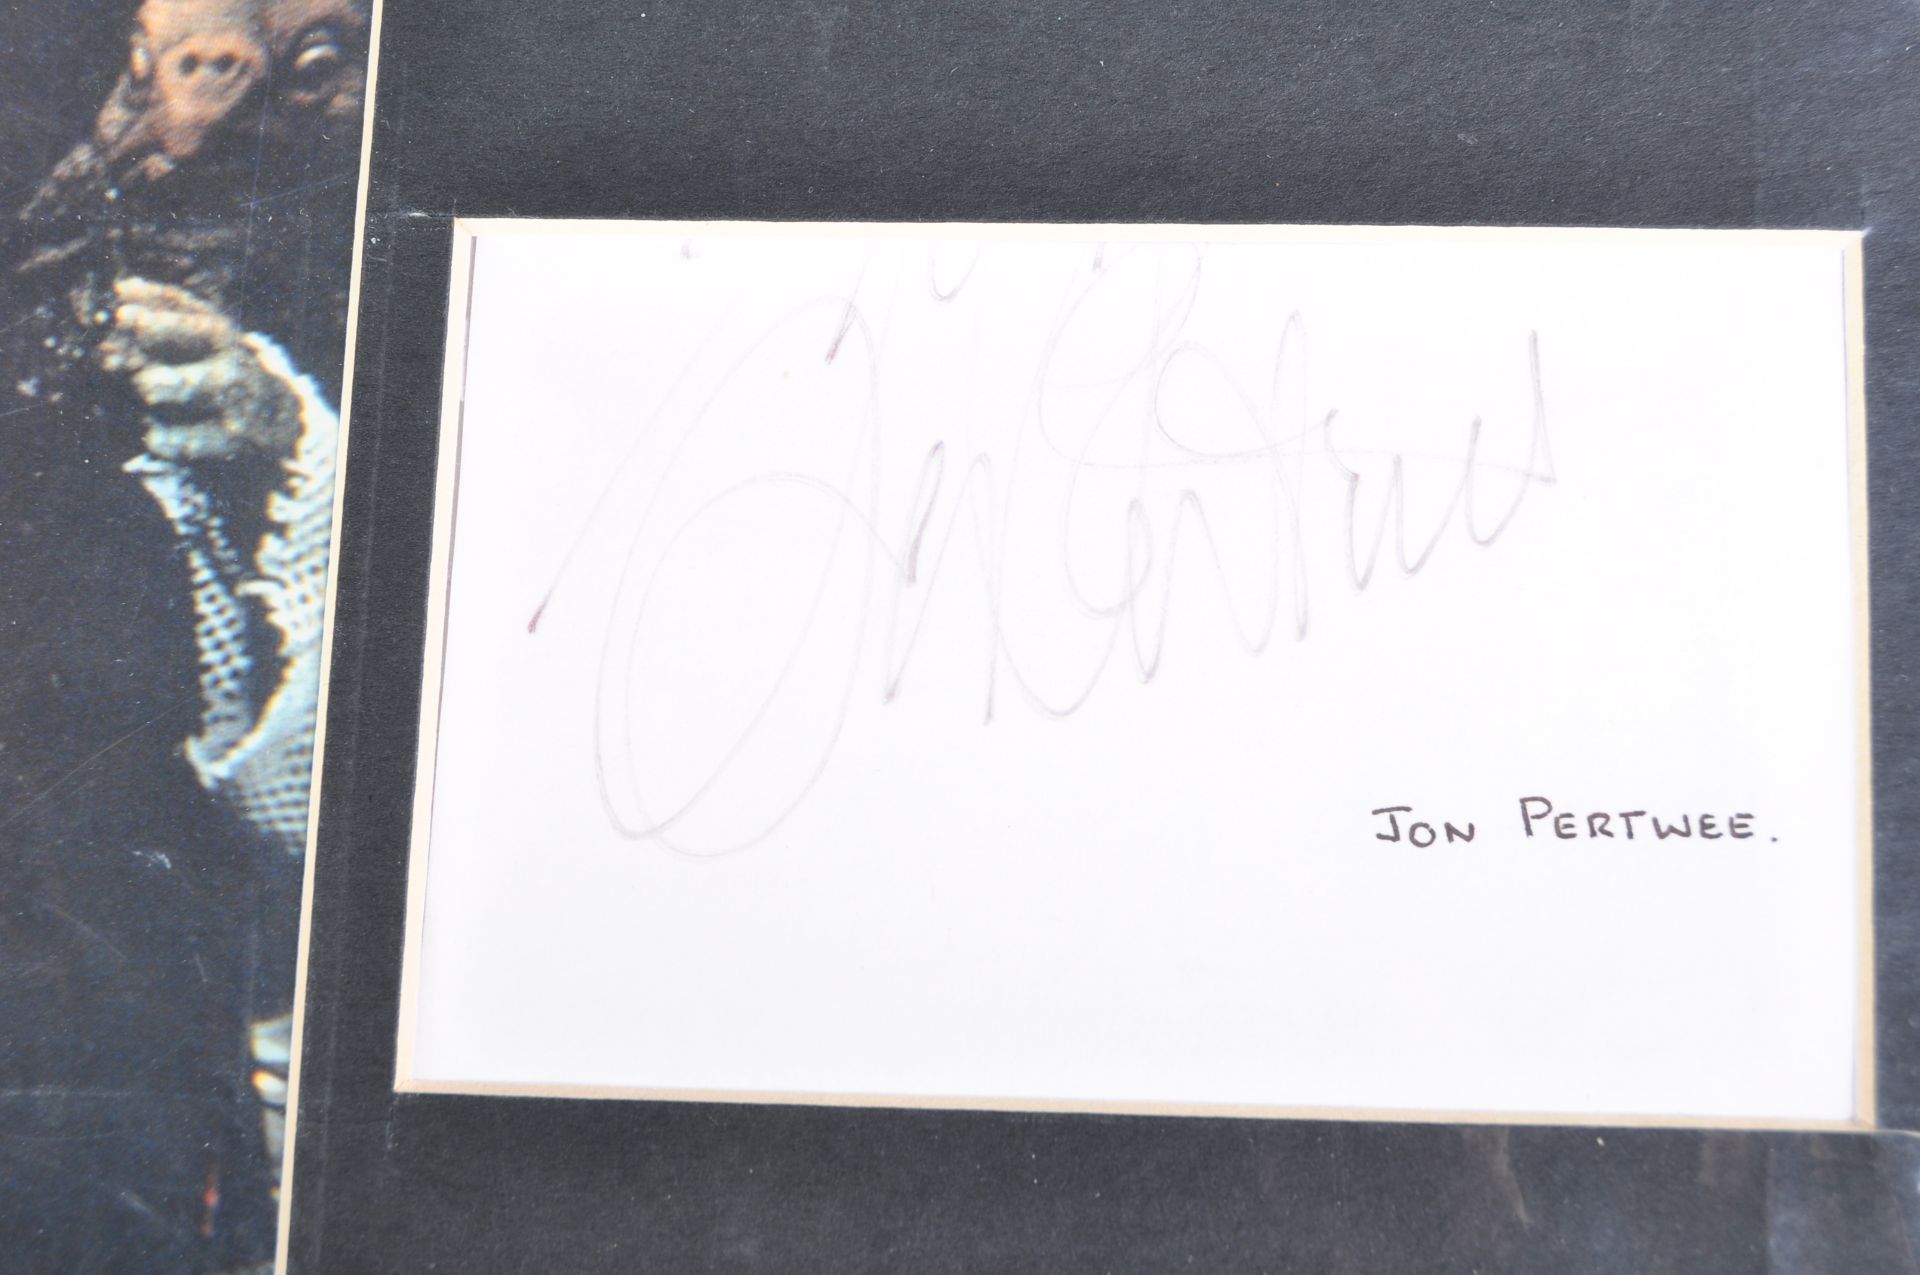 JON PERTWEE (1919-1996) - DOCTOR WHO - AUTOGRAPH DISPLAY - Image 2 of 2